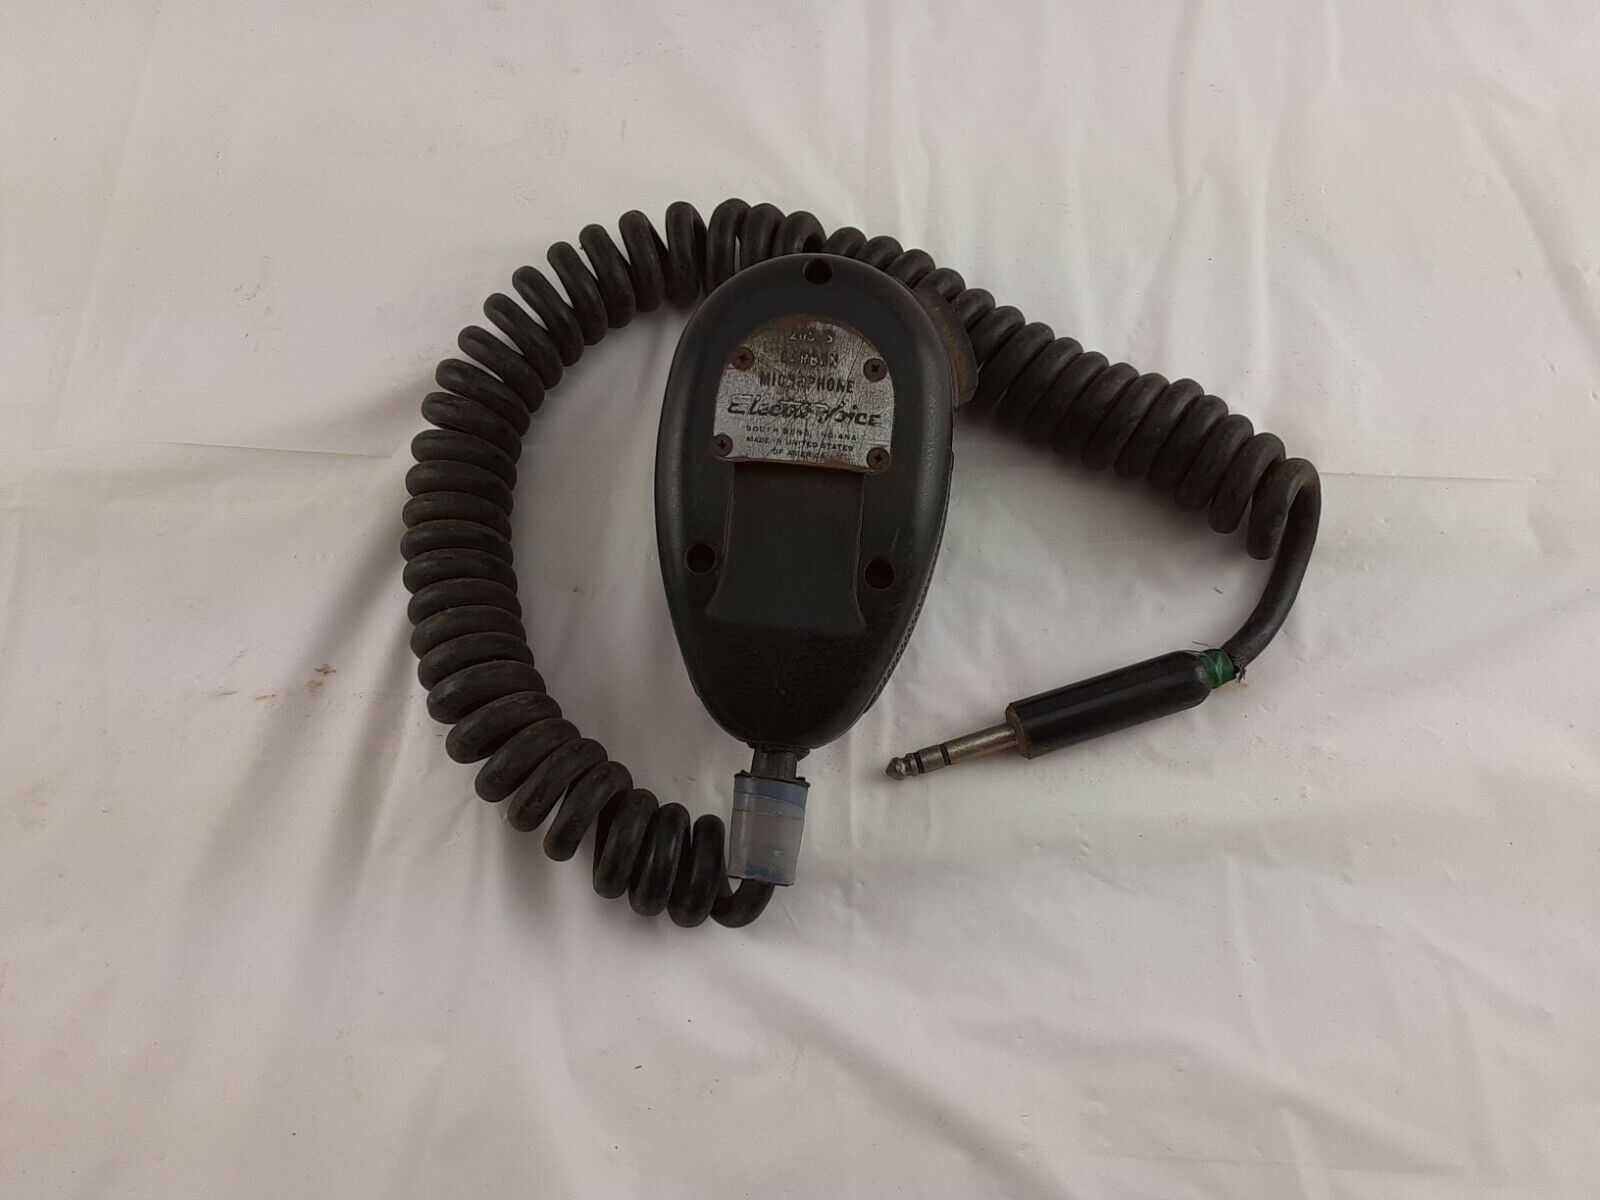 Electro-Voice 205-S Differential Pilot Microphone USA UNTESTED AS-IS